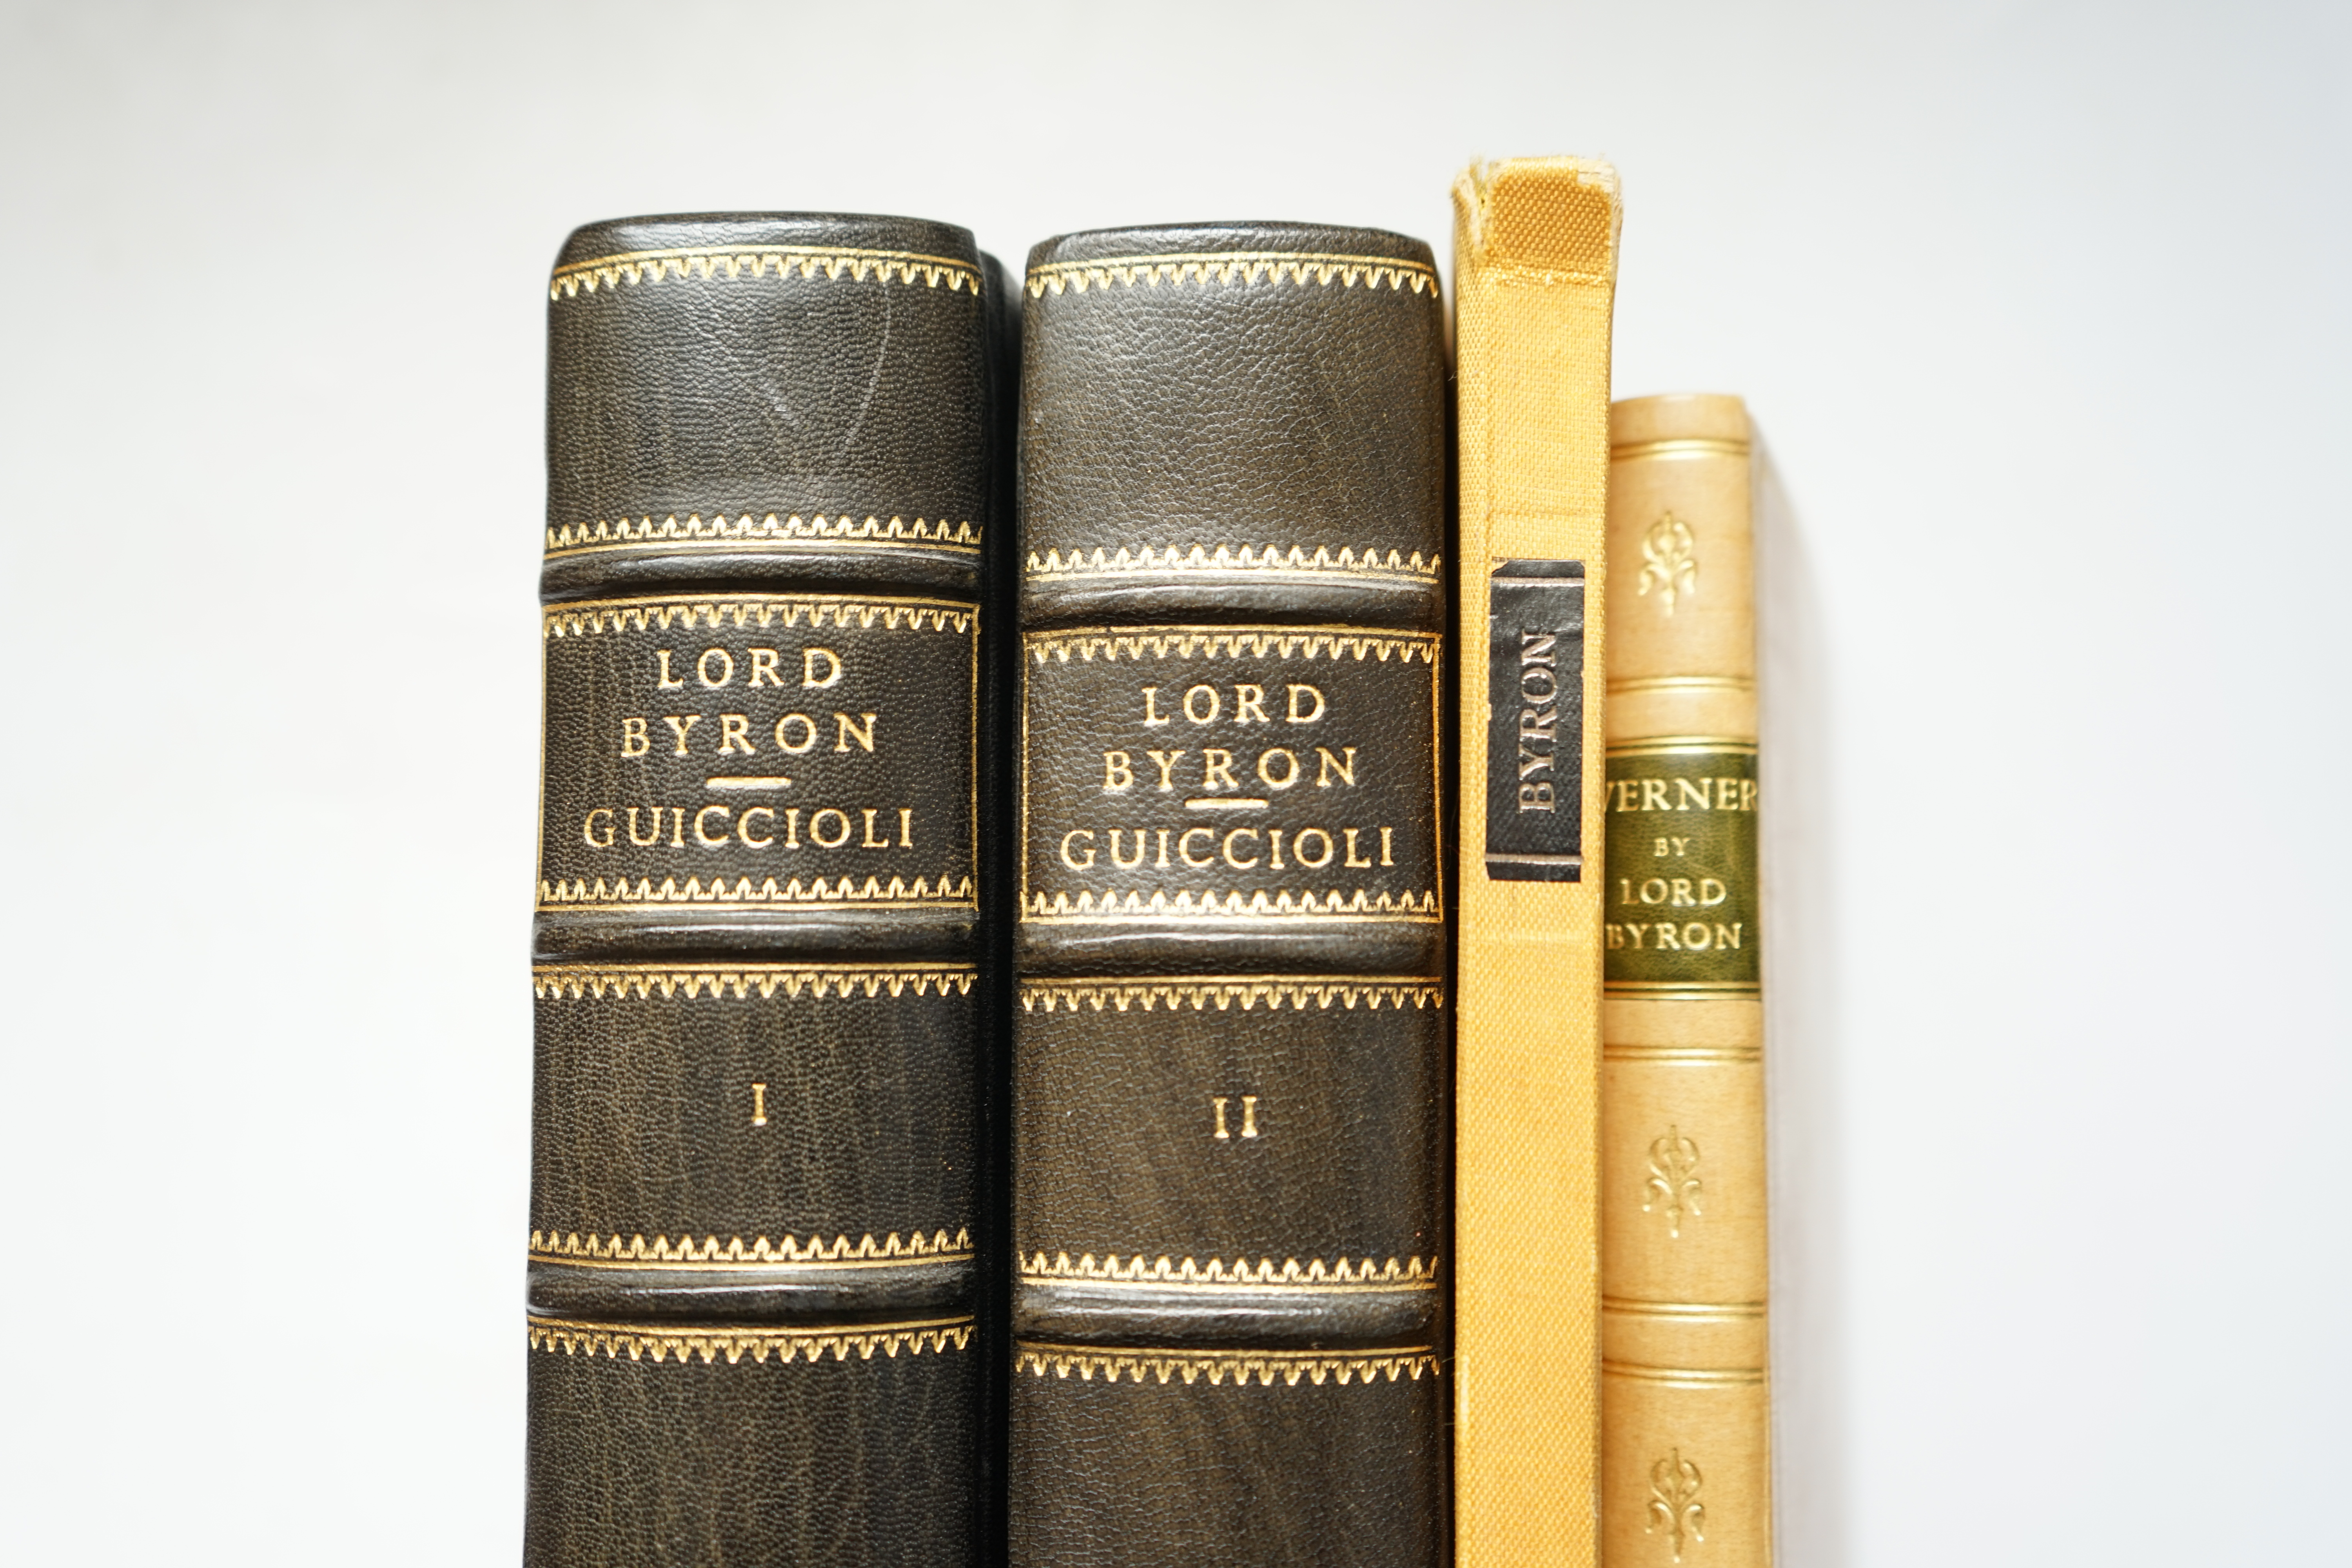 Guiccioli, Countess - My recollections of Lord Byron; and Those of Eye-Witnesses of his Life, 2 vols, 1st English-language edition, 8vo, rebound quarter calf with marbled boards, portrait frontis, Richard Bentley, London